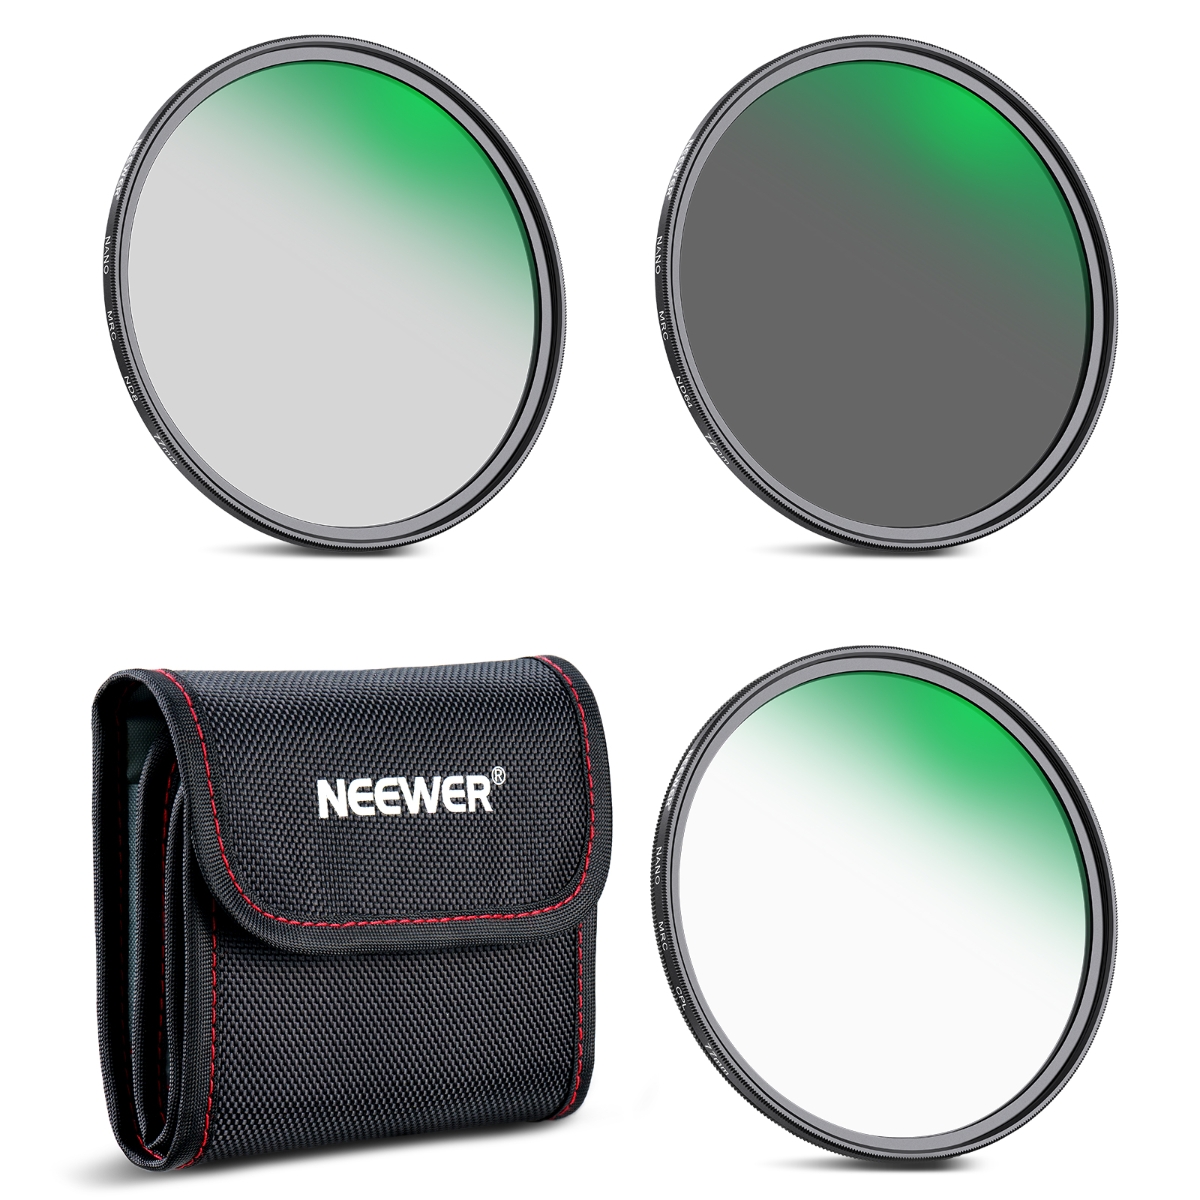 NEEWER 58mm/67mm/72mm/77mm/82mm レンズフィルターセット(ND8 ND64 CPL)